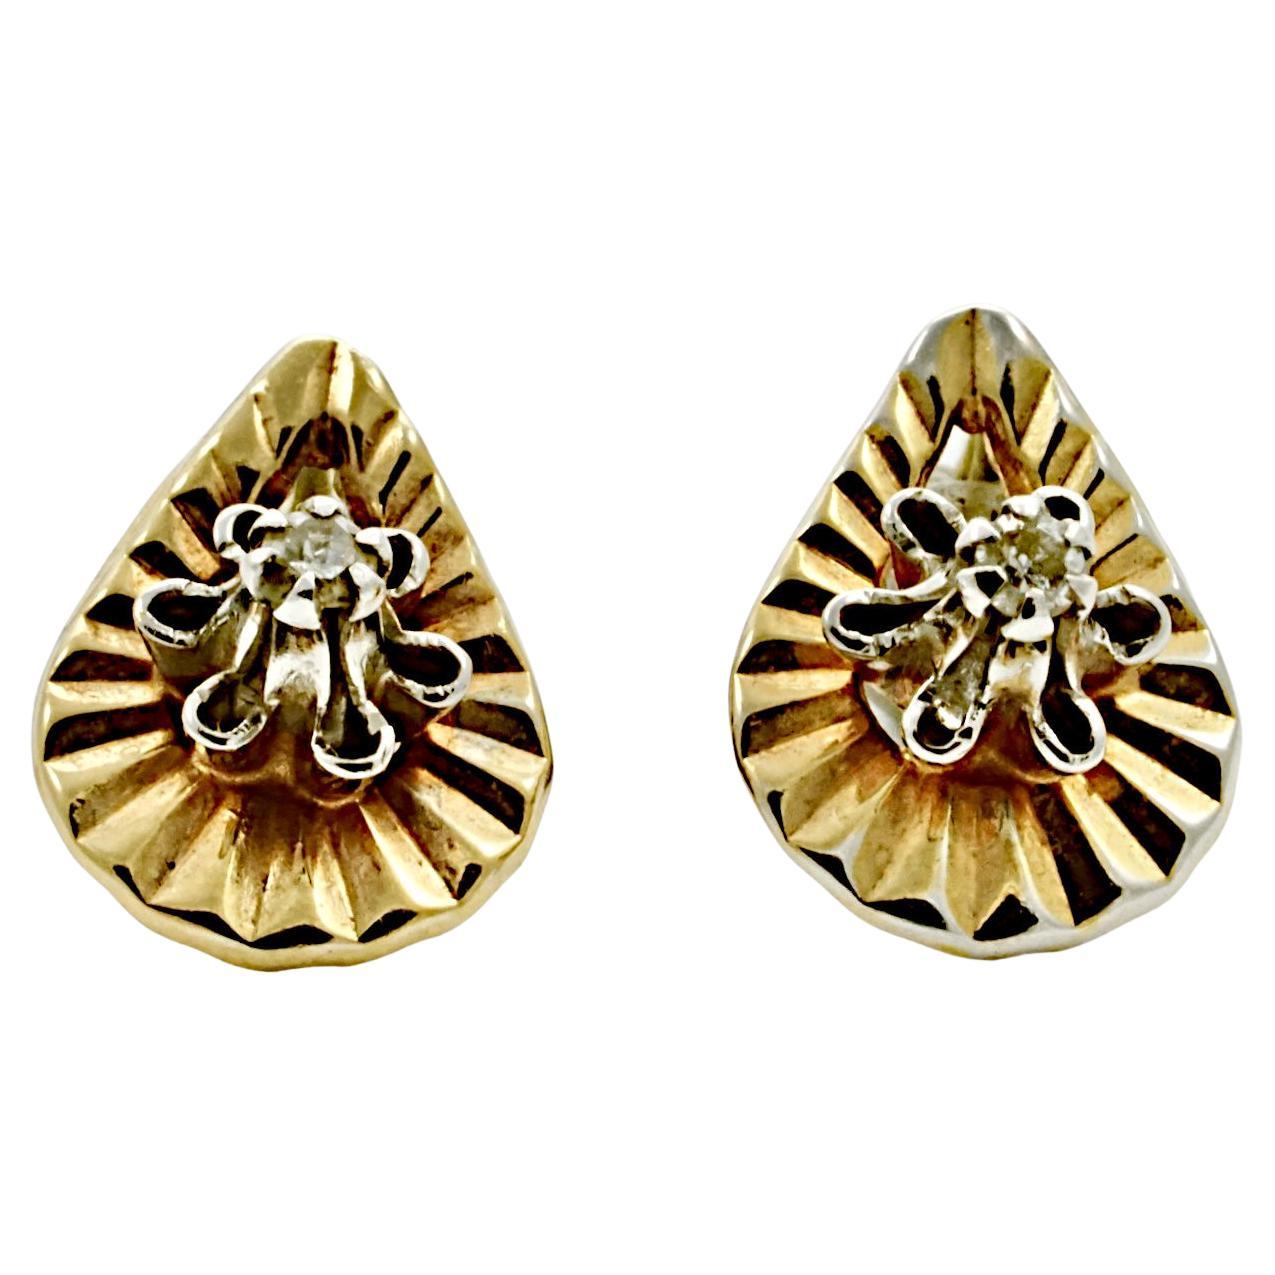 Beautiful gold teardrop diamond cut stud earrings featuring diamonds in fluted settings. The earrings test for gold, they are gilded in yellow gold with some wear. The 14K gold butterfly backs are stamped ZZ 14K, they are not the original backs.